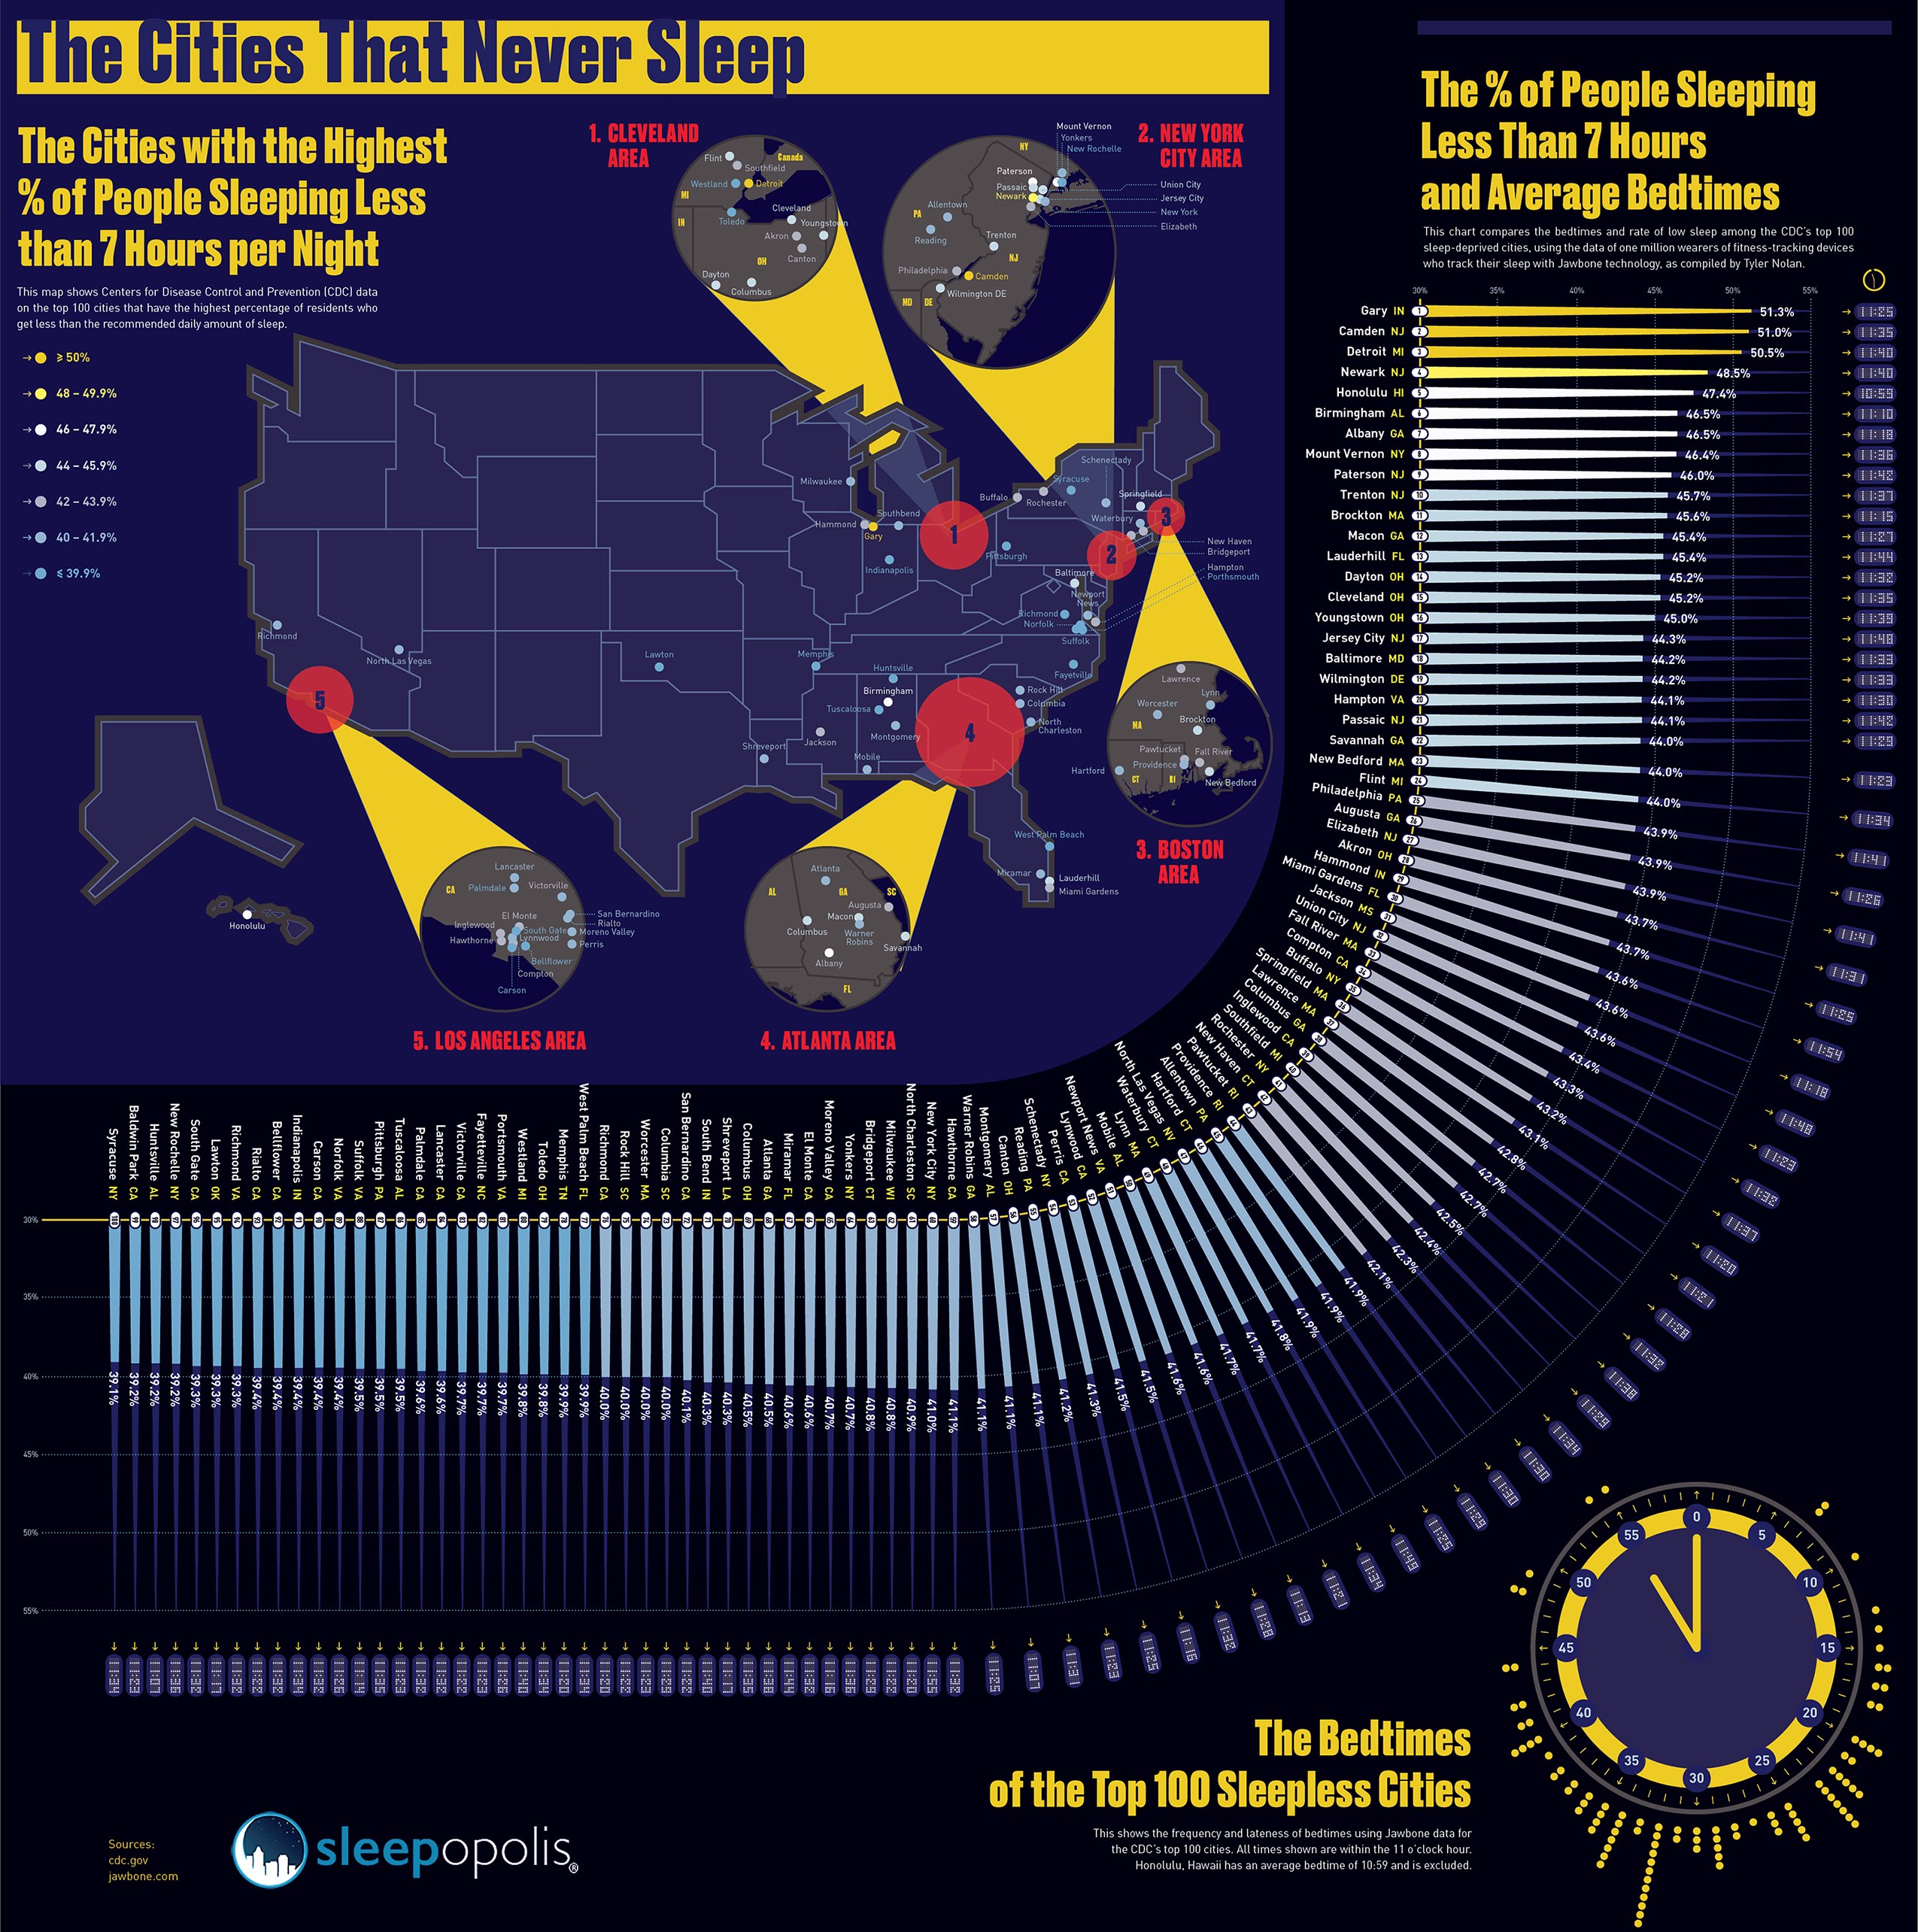 The Cities That Never Sleep #Infographic - Visualistan